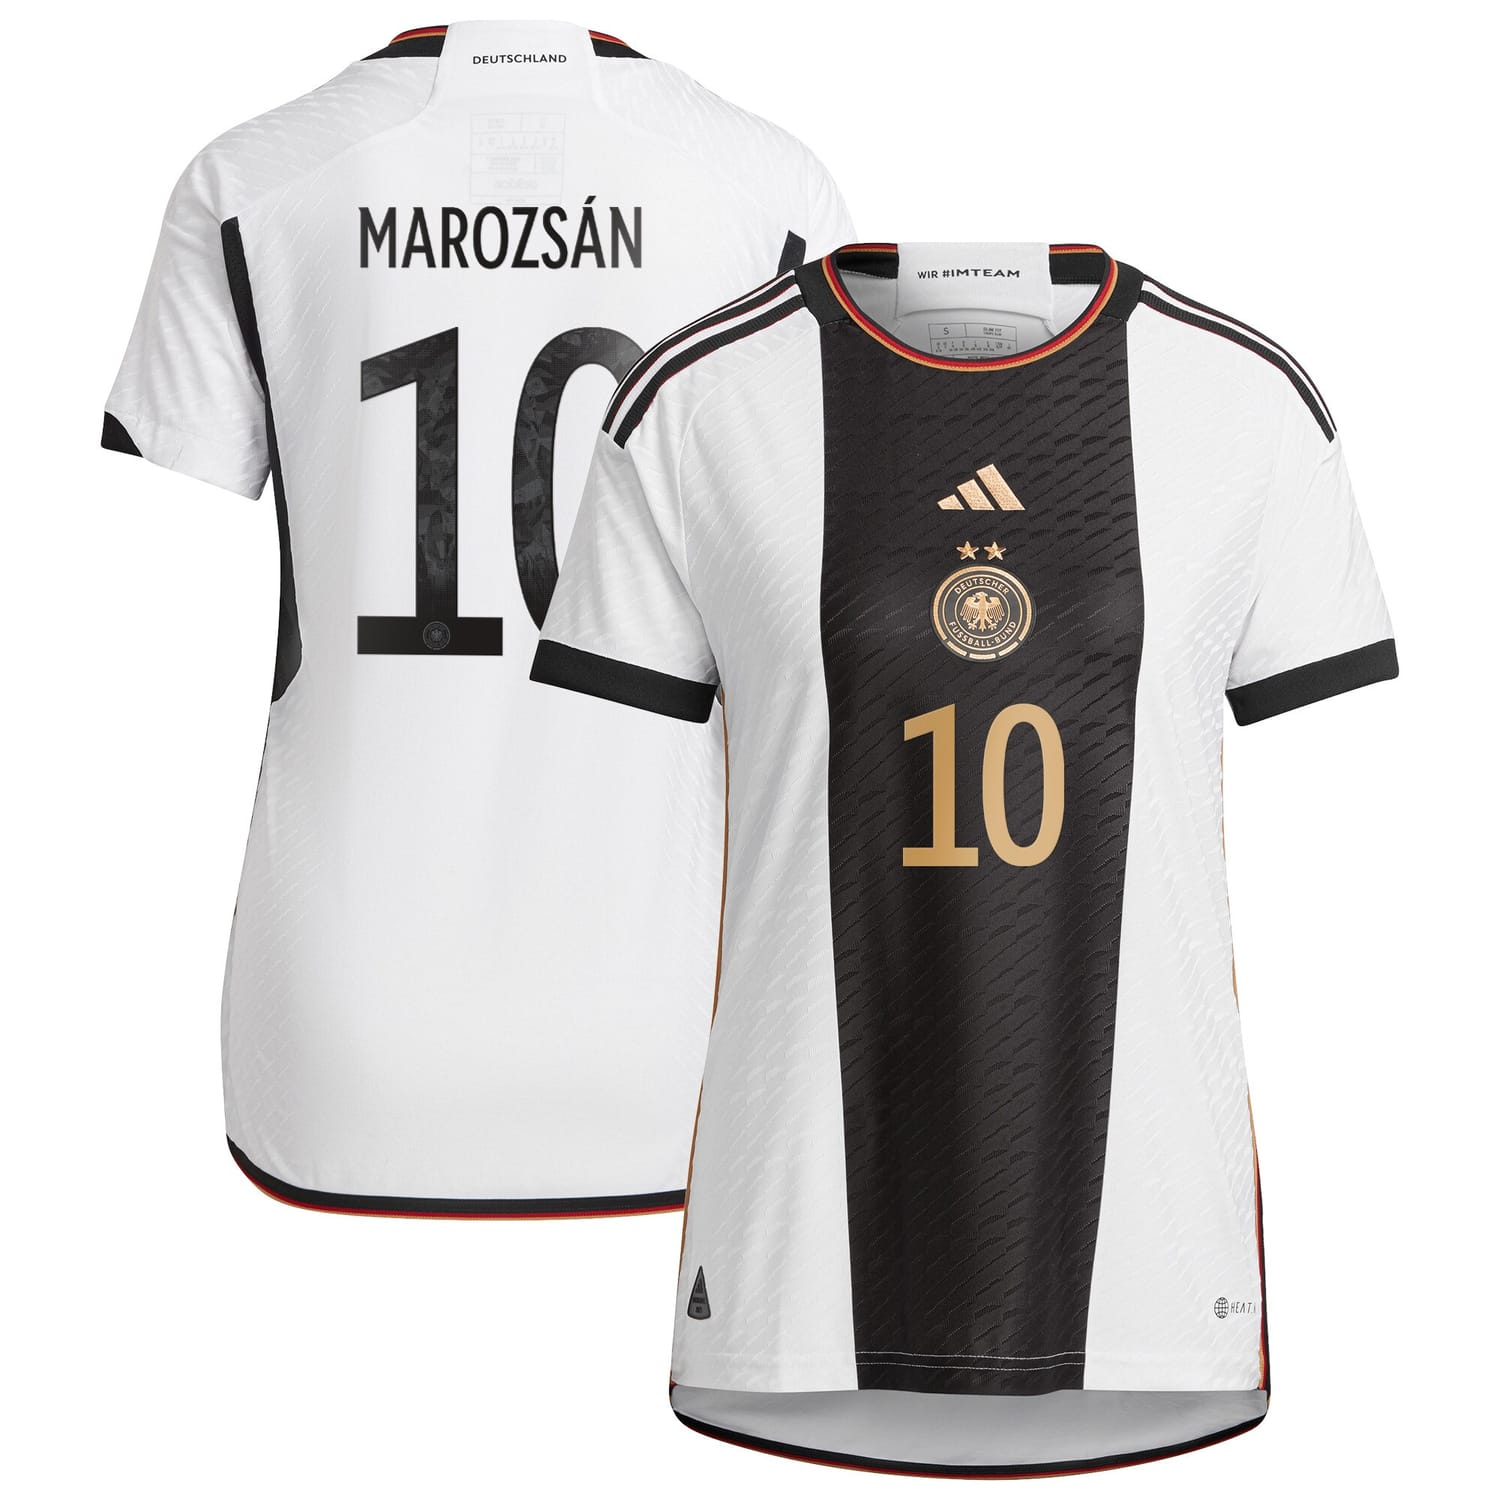 Germany National Team Home Authentic Jersey Shirt player Dzsenifer Marozsán 10 printing for Women